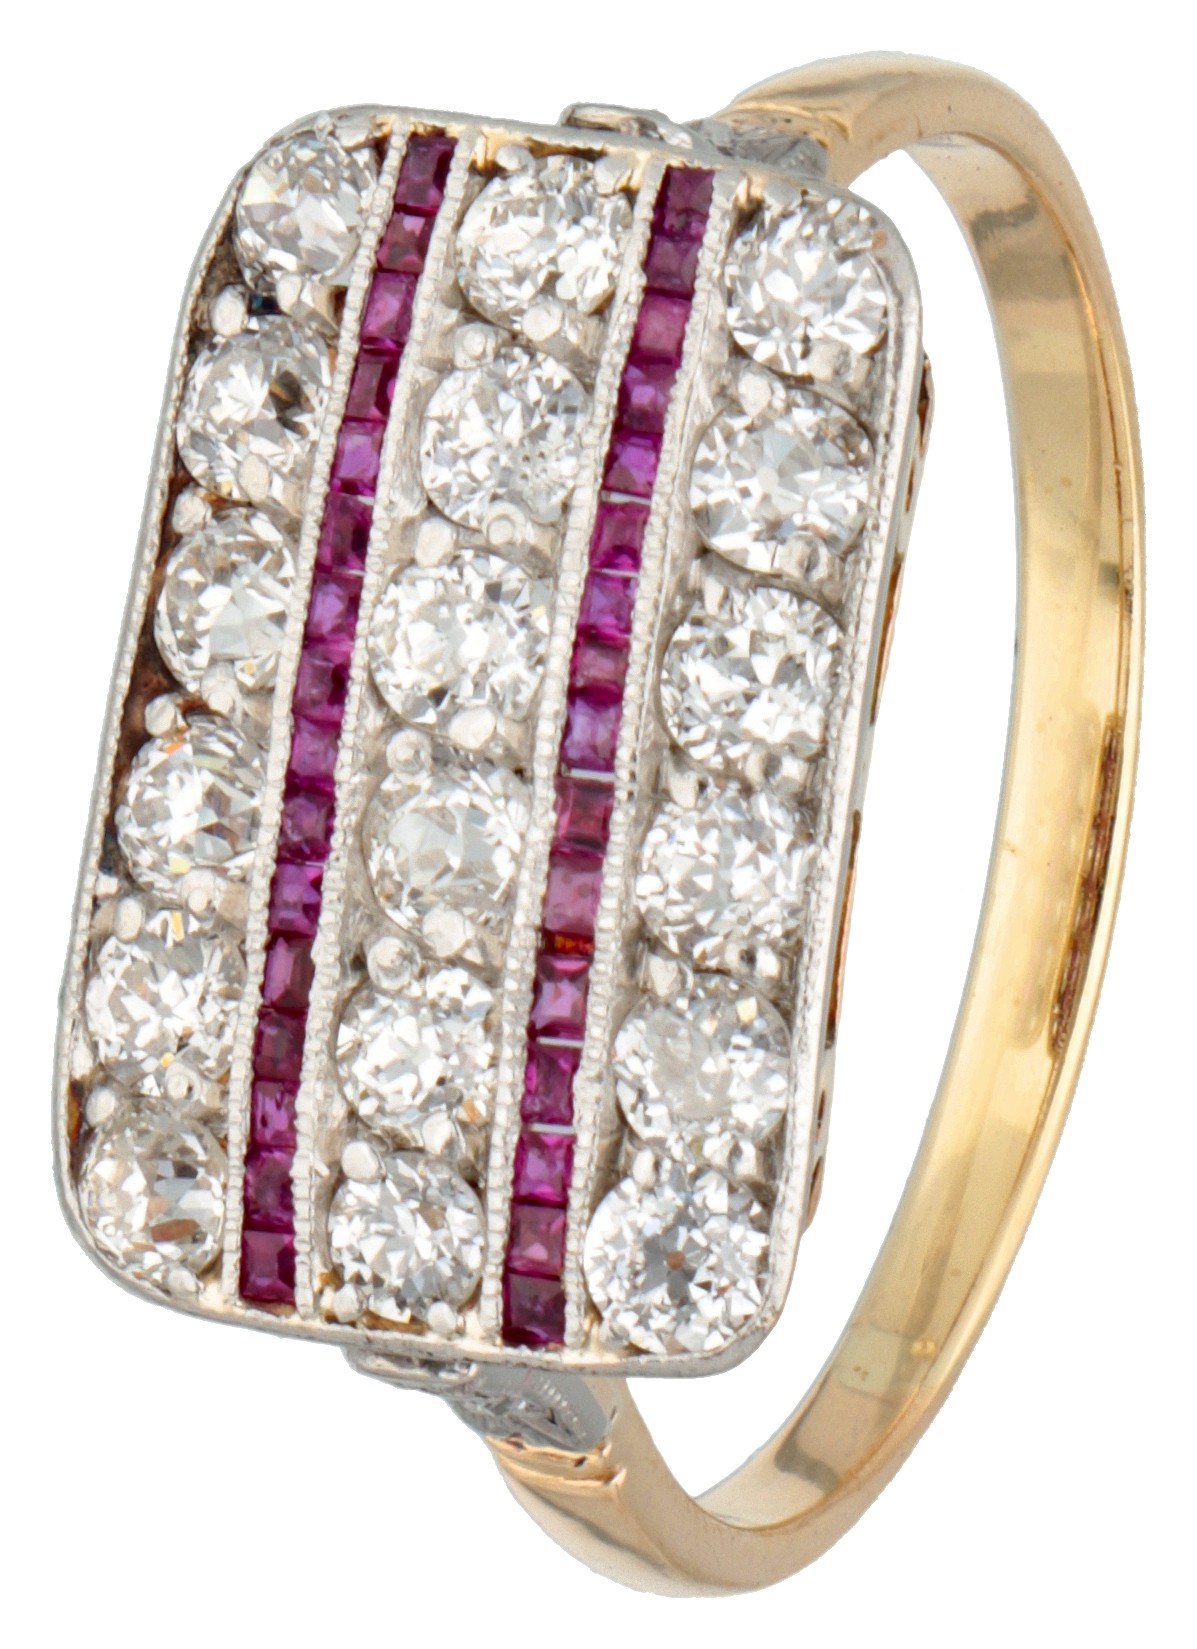 Art Deco 14K. yellow gold / platinum diamond ring approx 0.32 ct. and ruby.